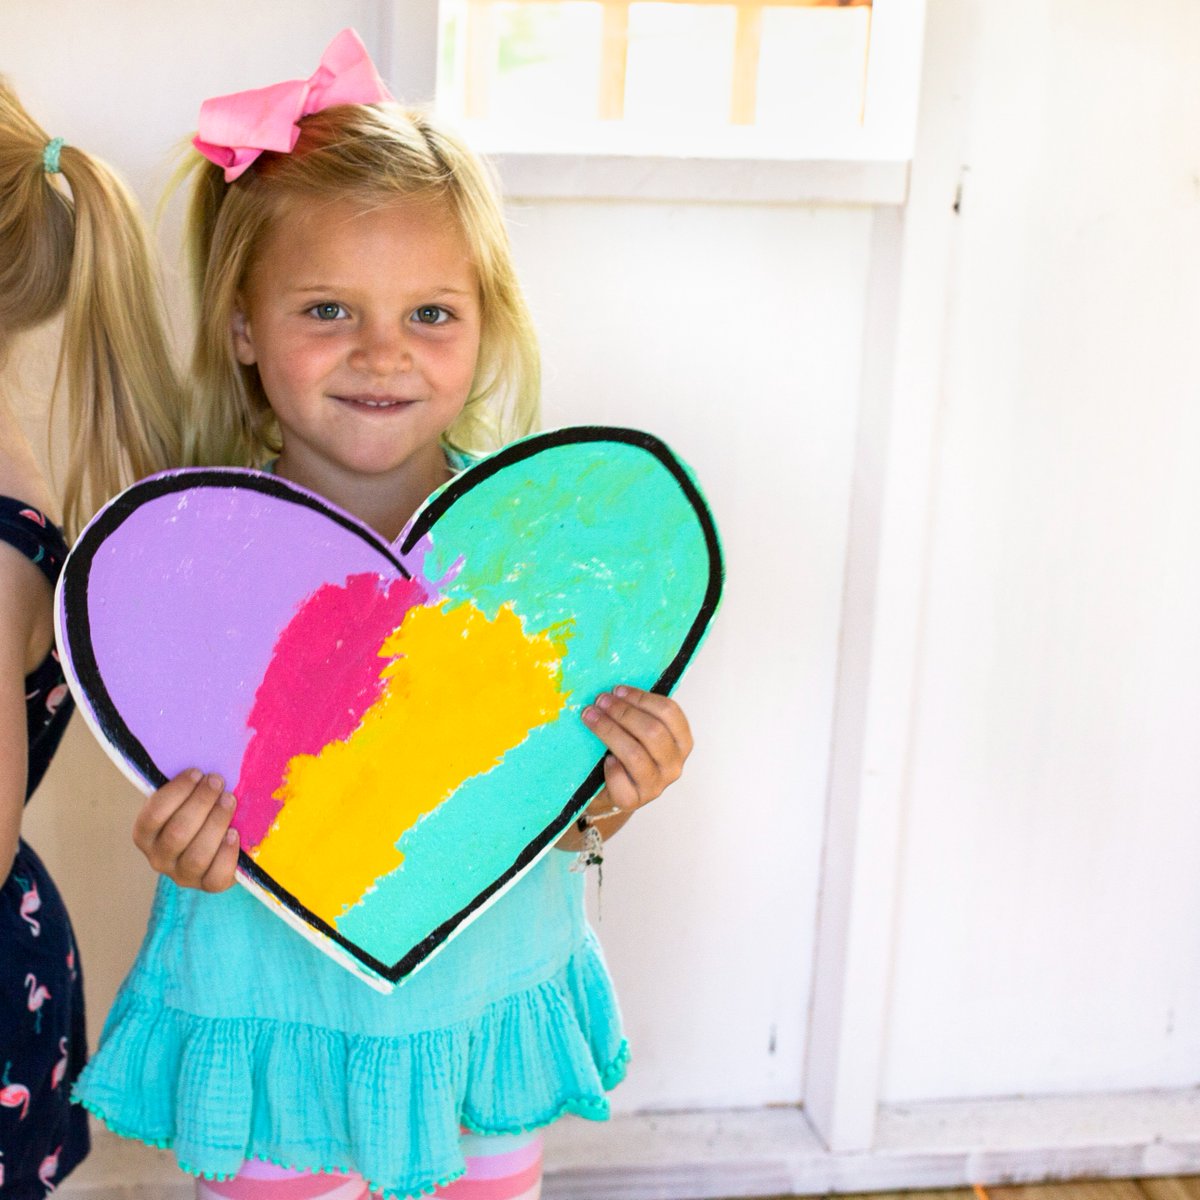 Every wish is as unique as the child who makes it. We do everything we can to bring the “heart” of a wish to life! This #AmericanHeartMonth, we’re celebrating the #HeartOfAWish for wish kids who are fighting heart conditions. 💙 Visit wish.org/heart to read Macie’s story